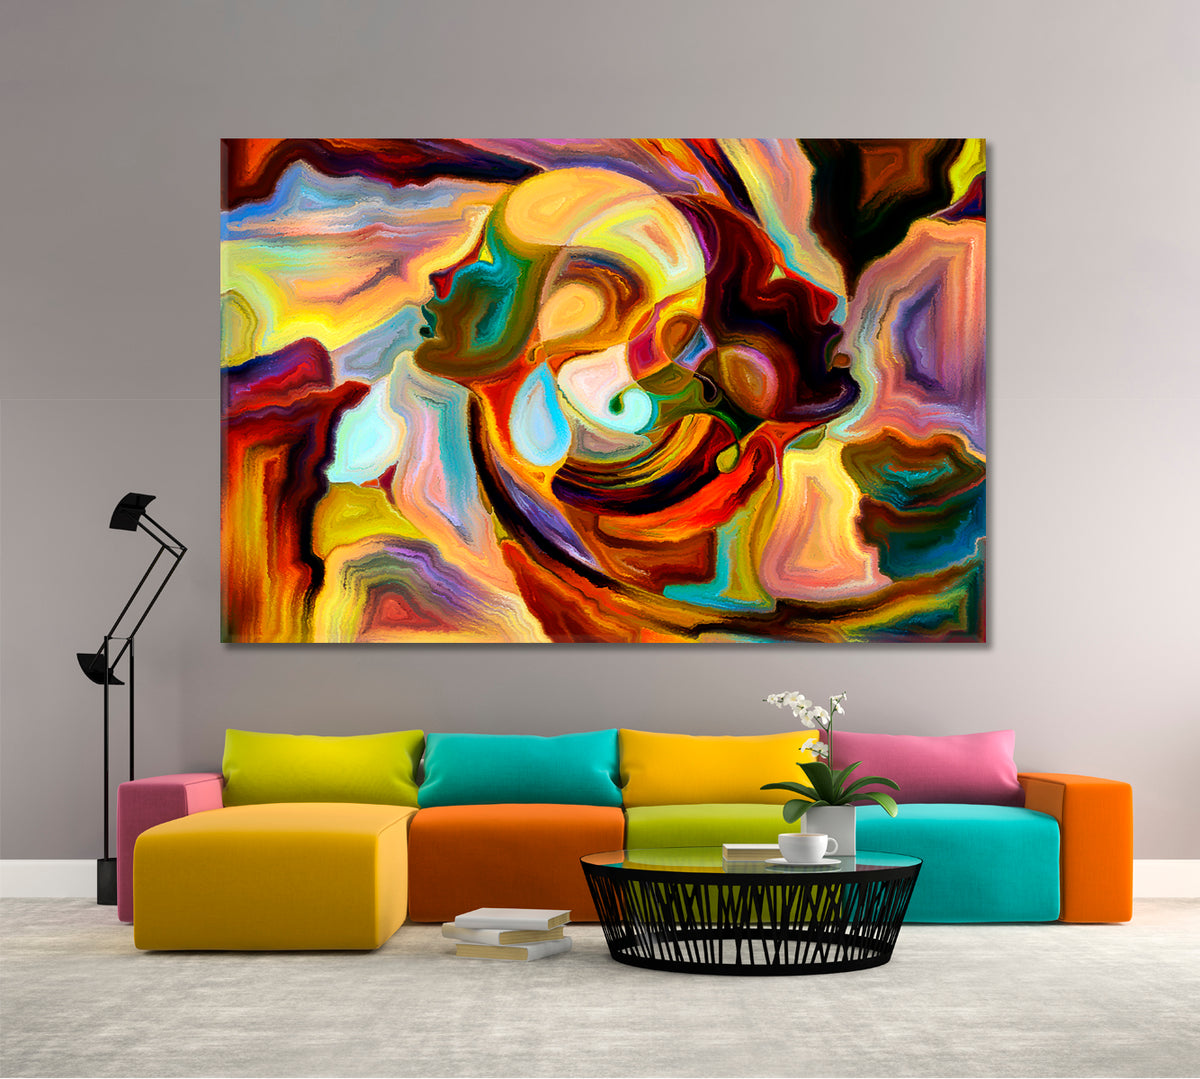 VORTEX MIND Contemporary Abstract Colorful Patterns Contemporary Art Artesty 1 panel 24" x 16" 